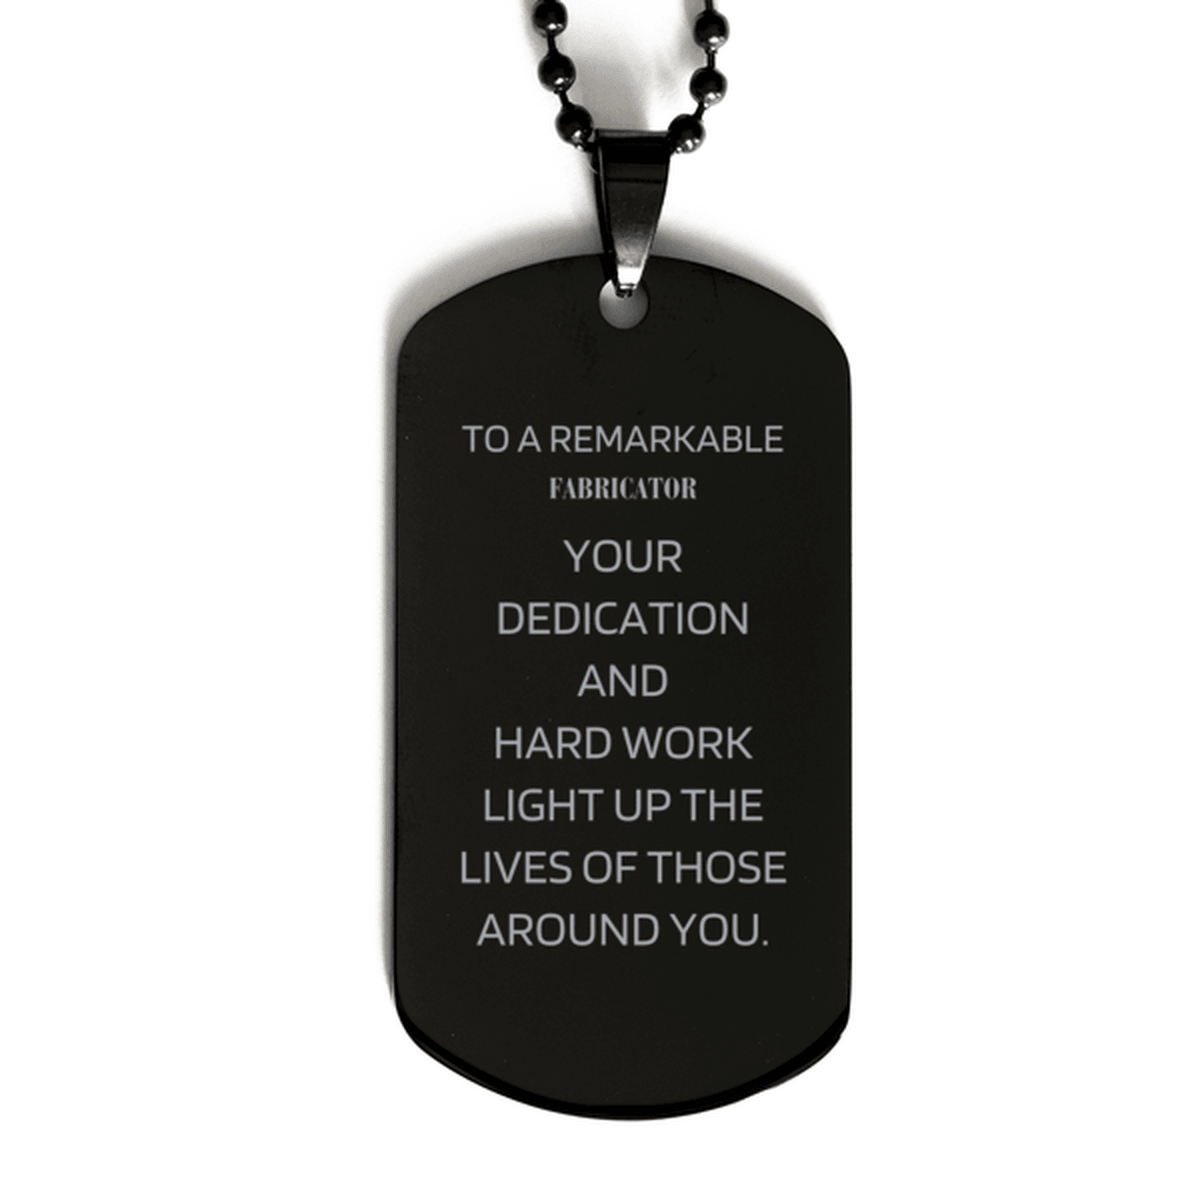 Remarkable Fabricator Gifts, Your dedication and hard work, Inspirational Birthday Christmas Unique Black Dog Tag For Fabricator, Coworkers, Men, Women, Friends - Mallard Moon Gift Shop